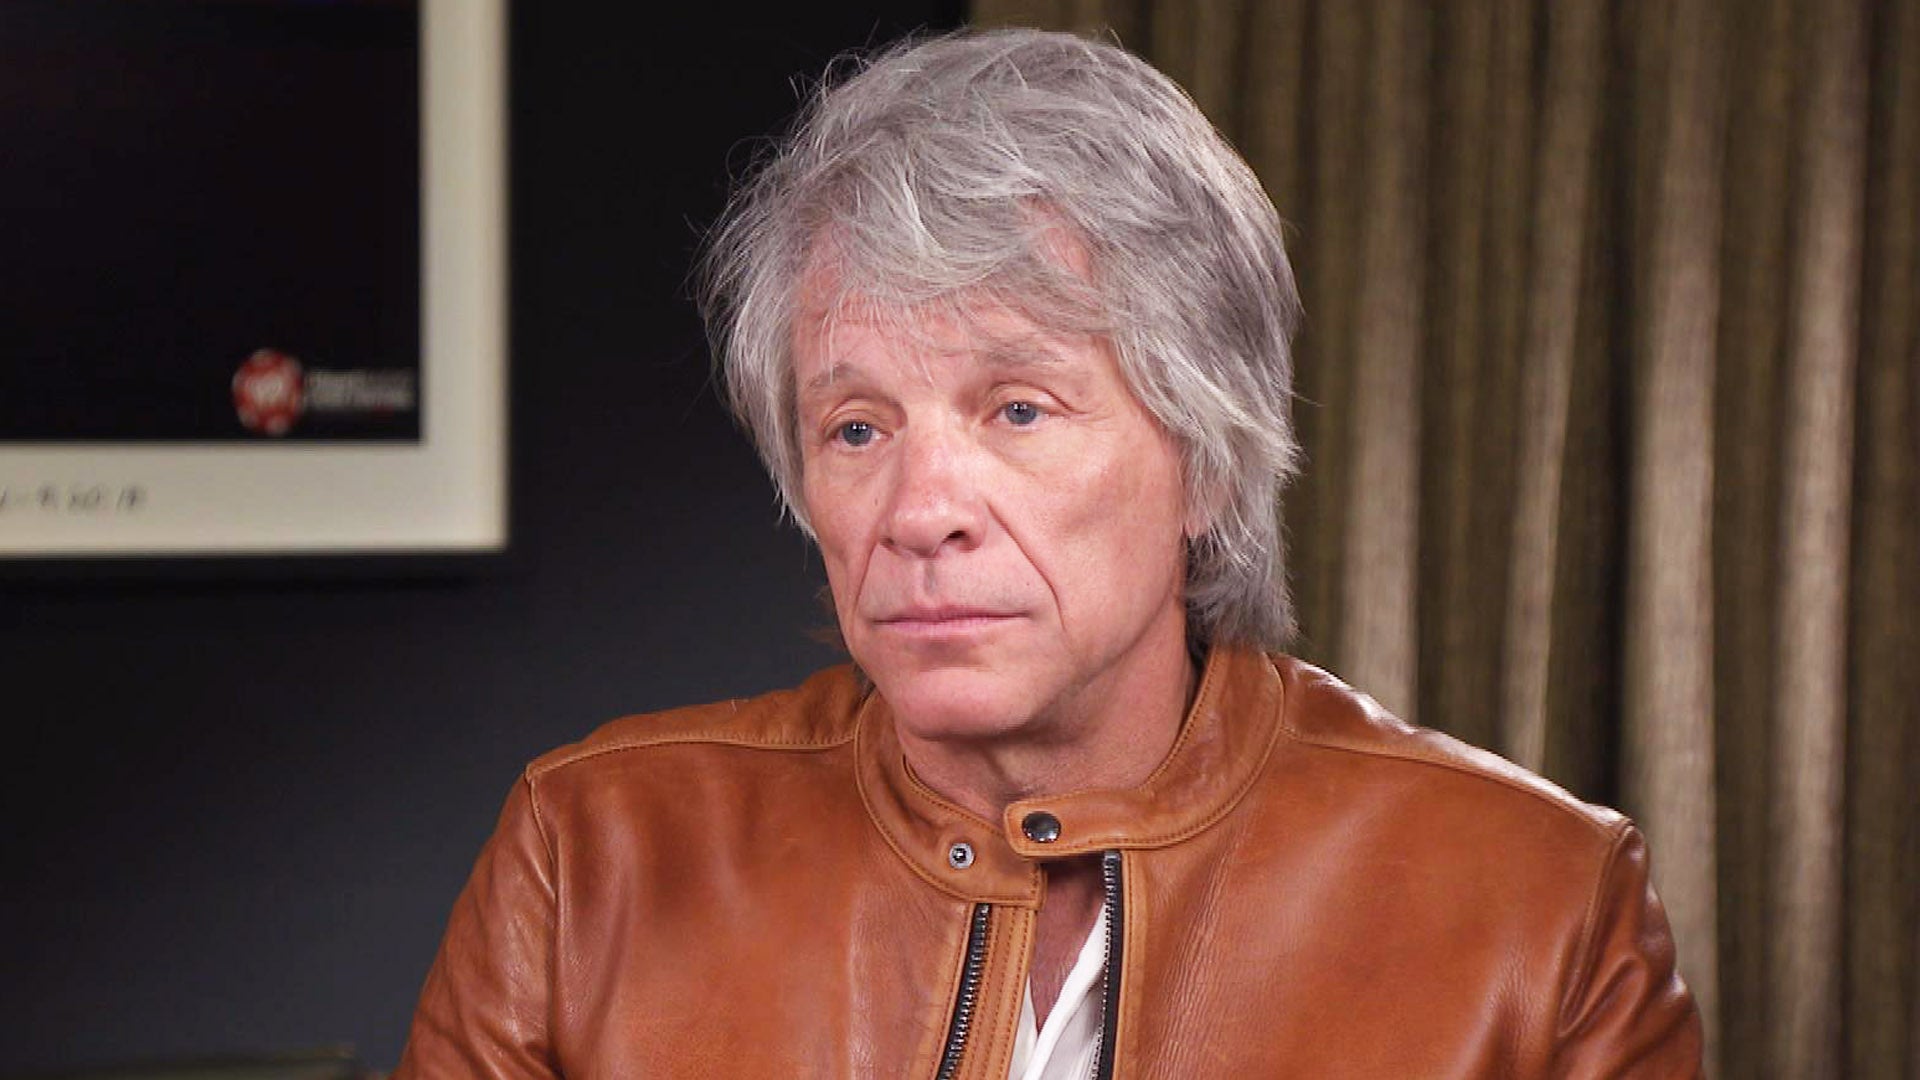 Jon Bon Jovi on Creating New Music After His Vocal Cord Injury (Exclusive)